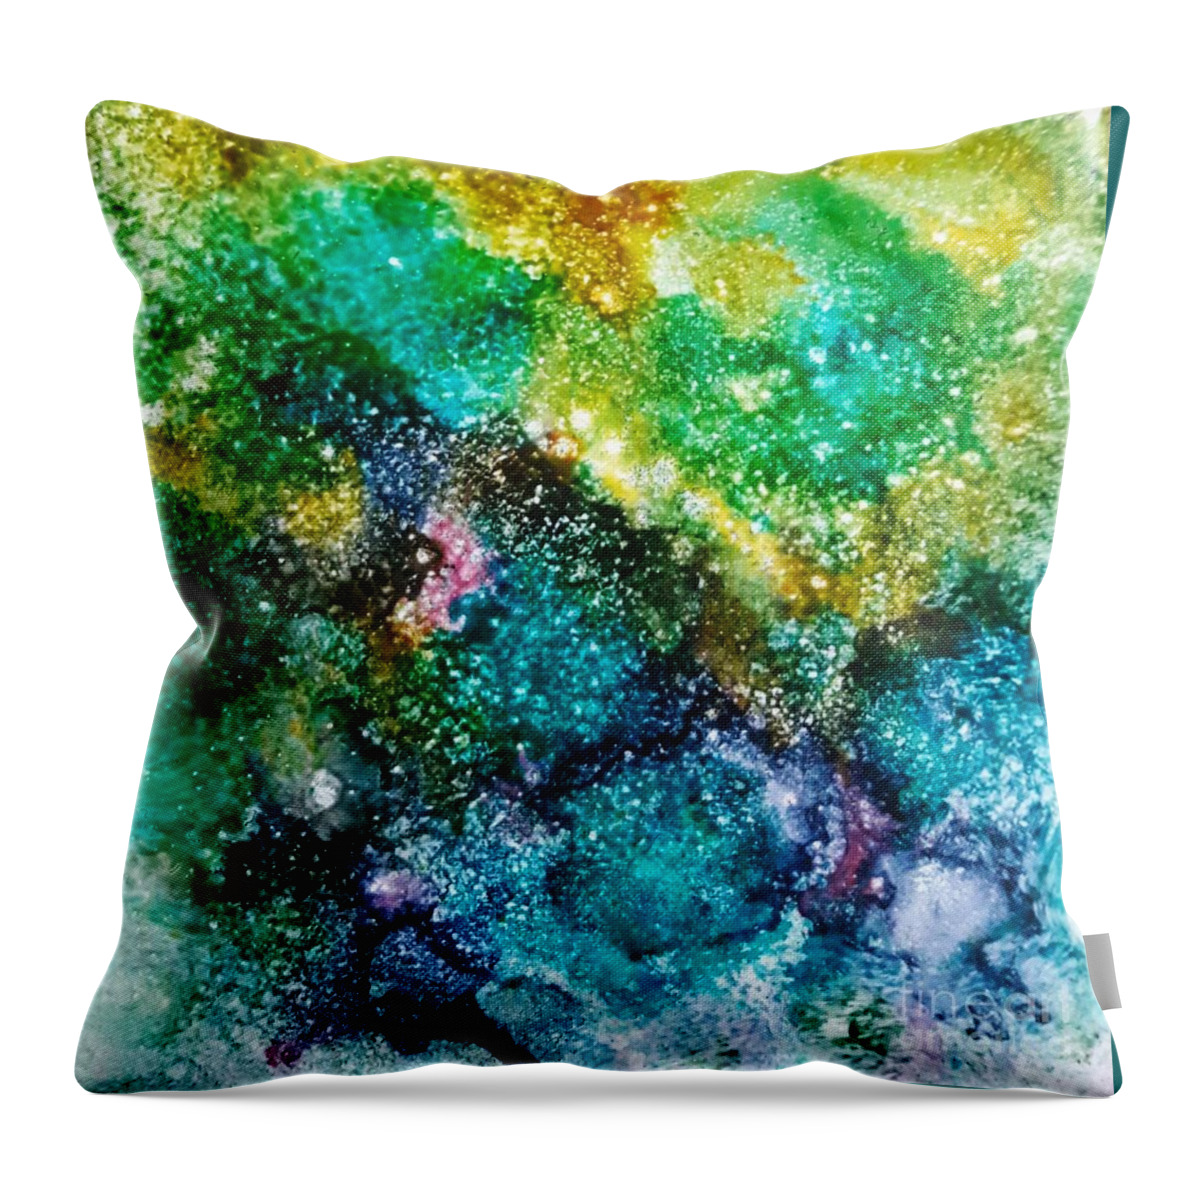 Alcohol Throw Pillow featuring the painting Sparkling Water by Terri Mills